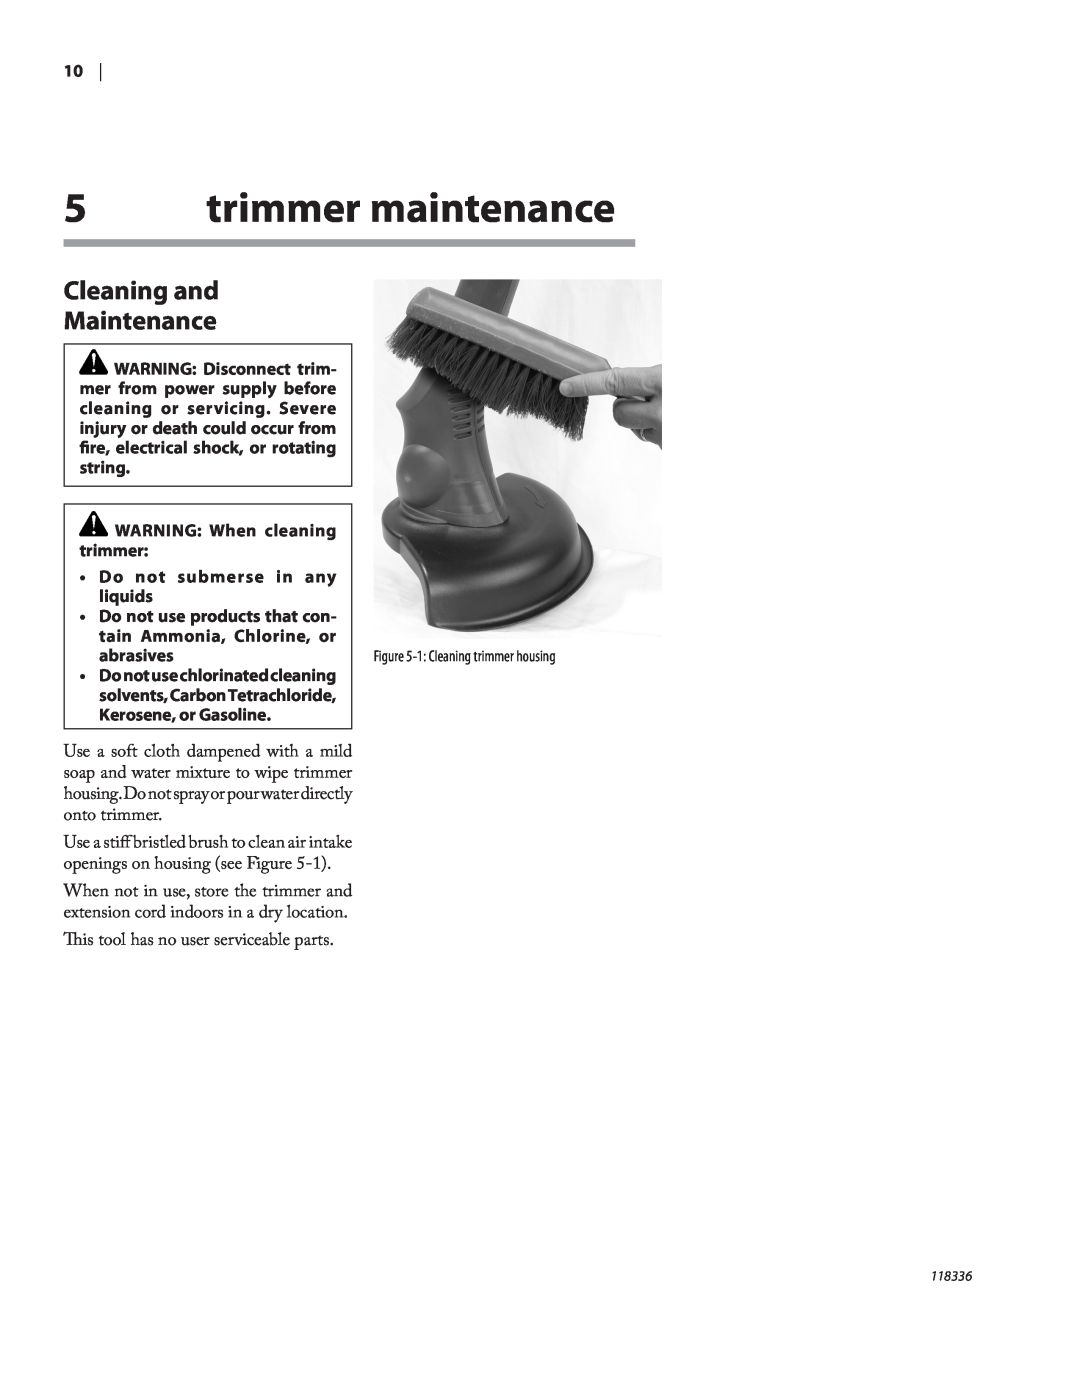 Remington Power Tools ST3010A owner manual trimmer maintenance, Cleaning and Maintenance, abrasives 